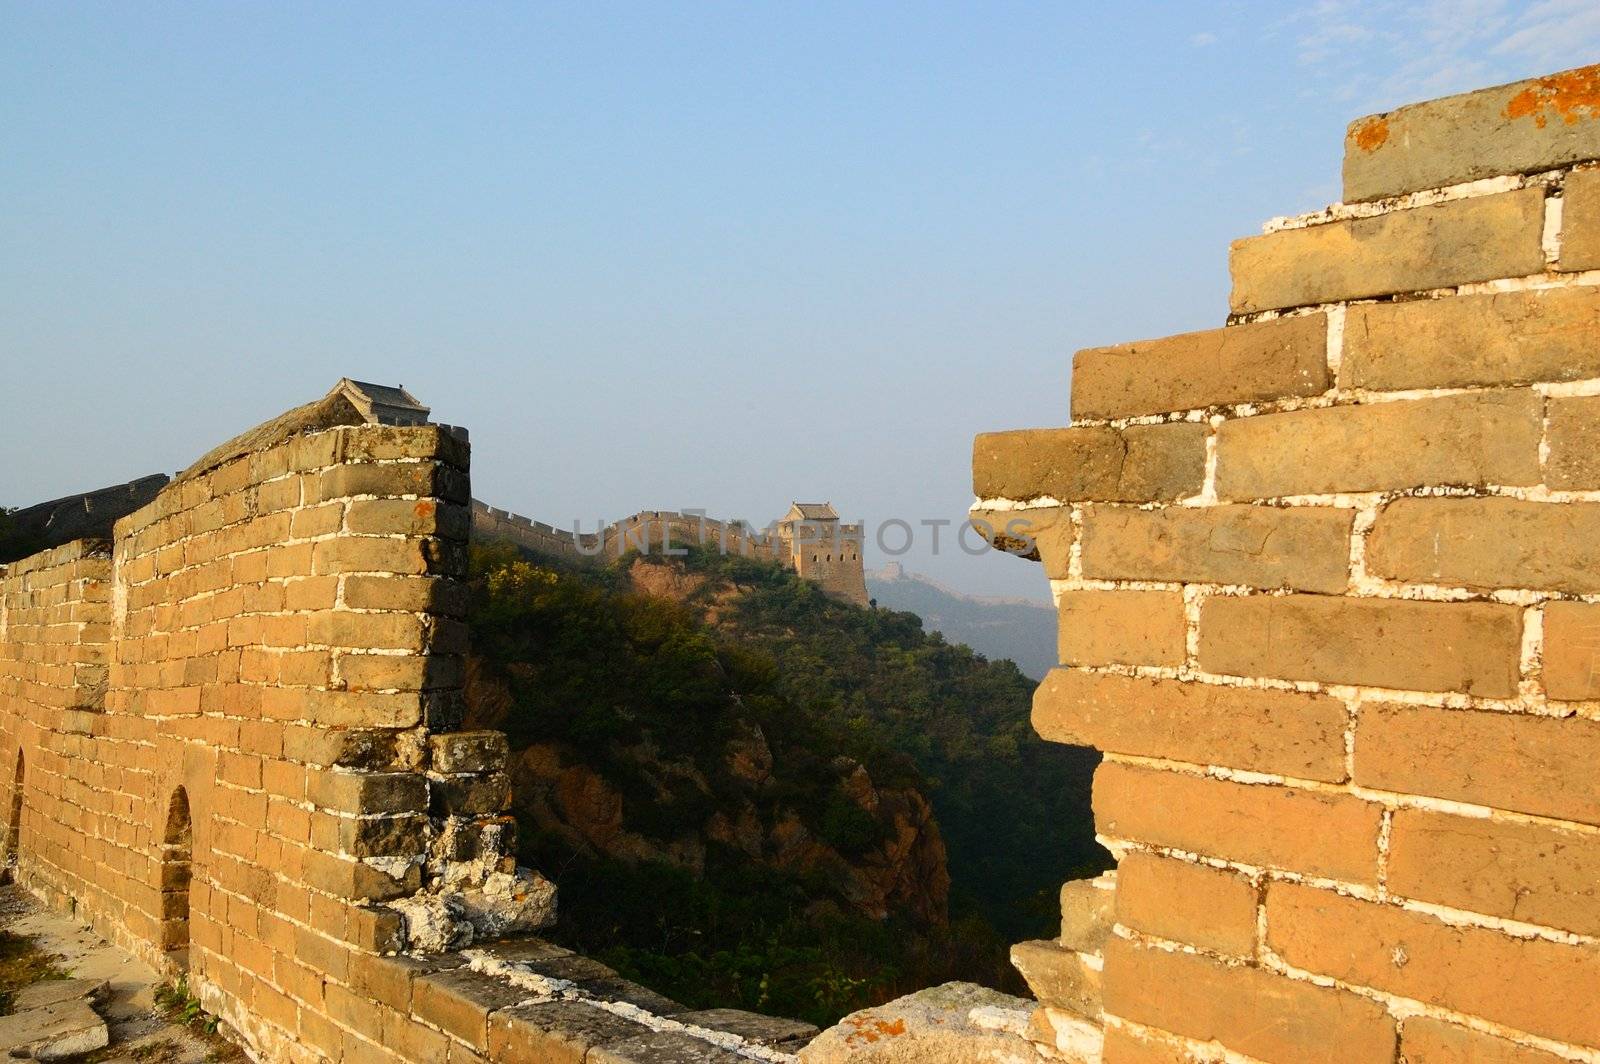 The Great Wall of China in Jinshanling, Hebei Province, China